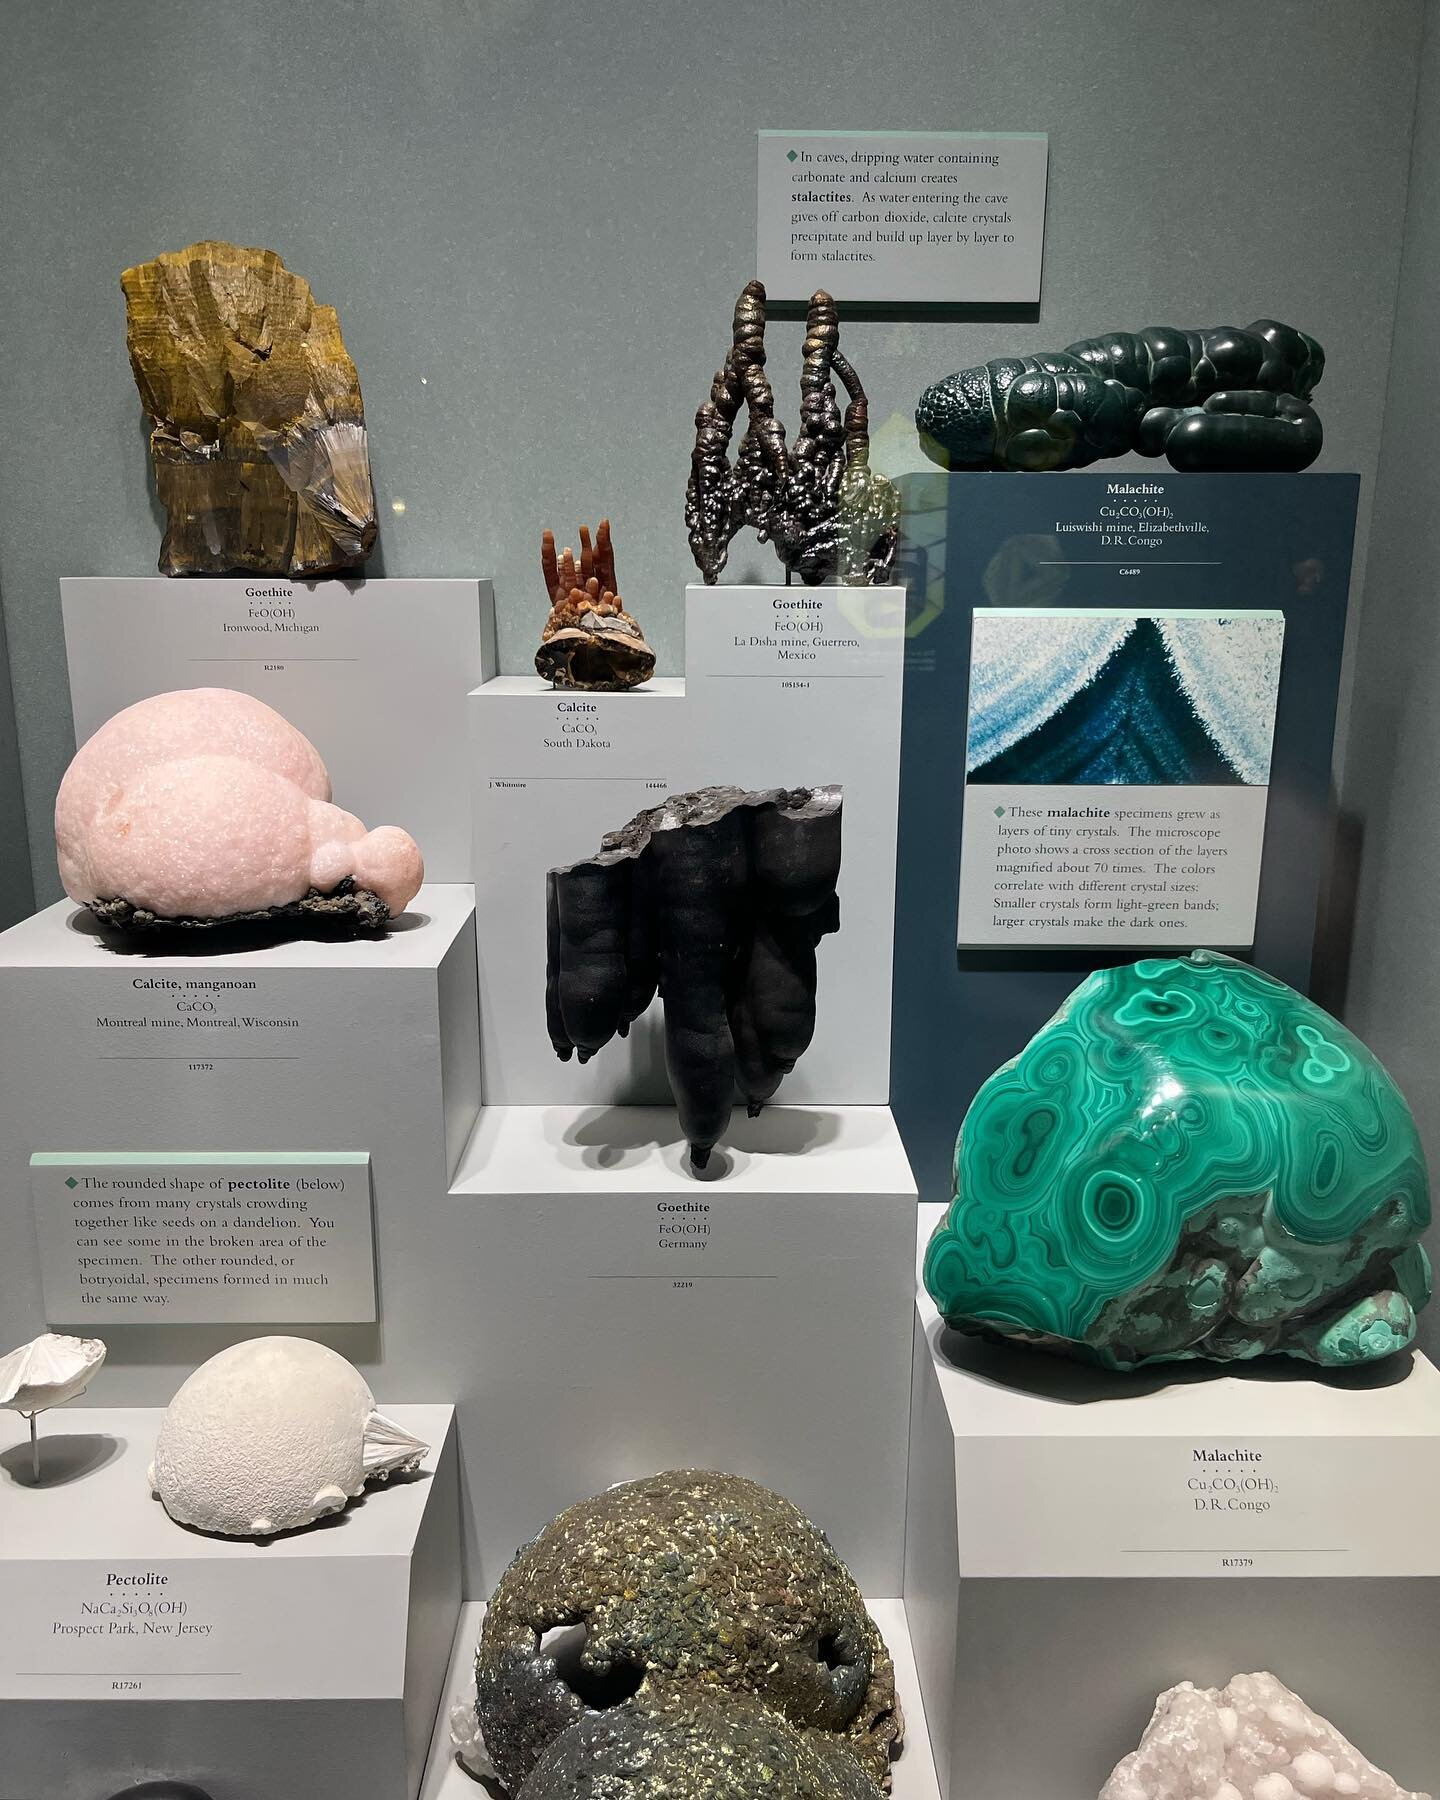 Finding color and textural inspo everywhere 🪨
.
.
.
.
.
#explore #travel #dc #museum #display #rock  #gem #mineral #stone #washington #inspiration #inspired #interiordesigner #interiors #designer #decor #design #traveling #traveler